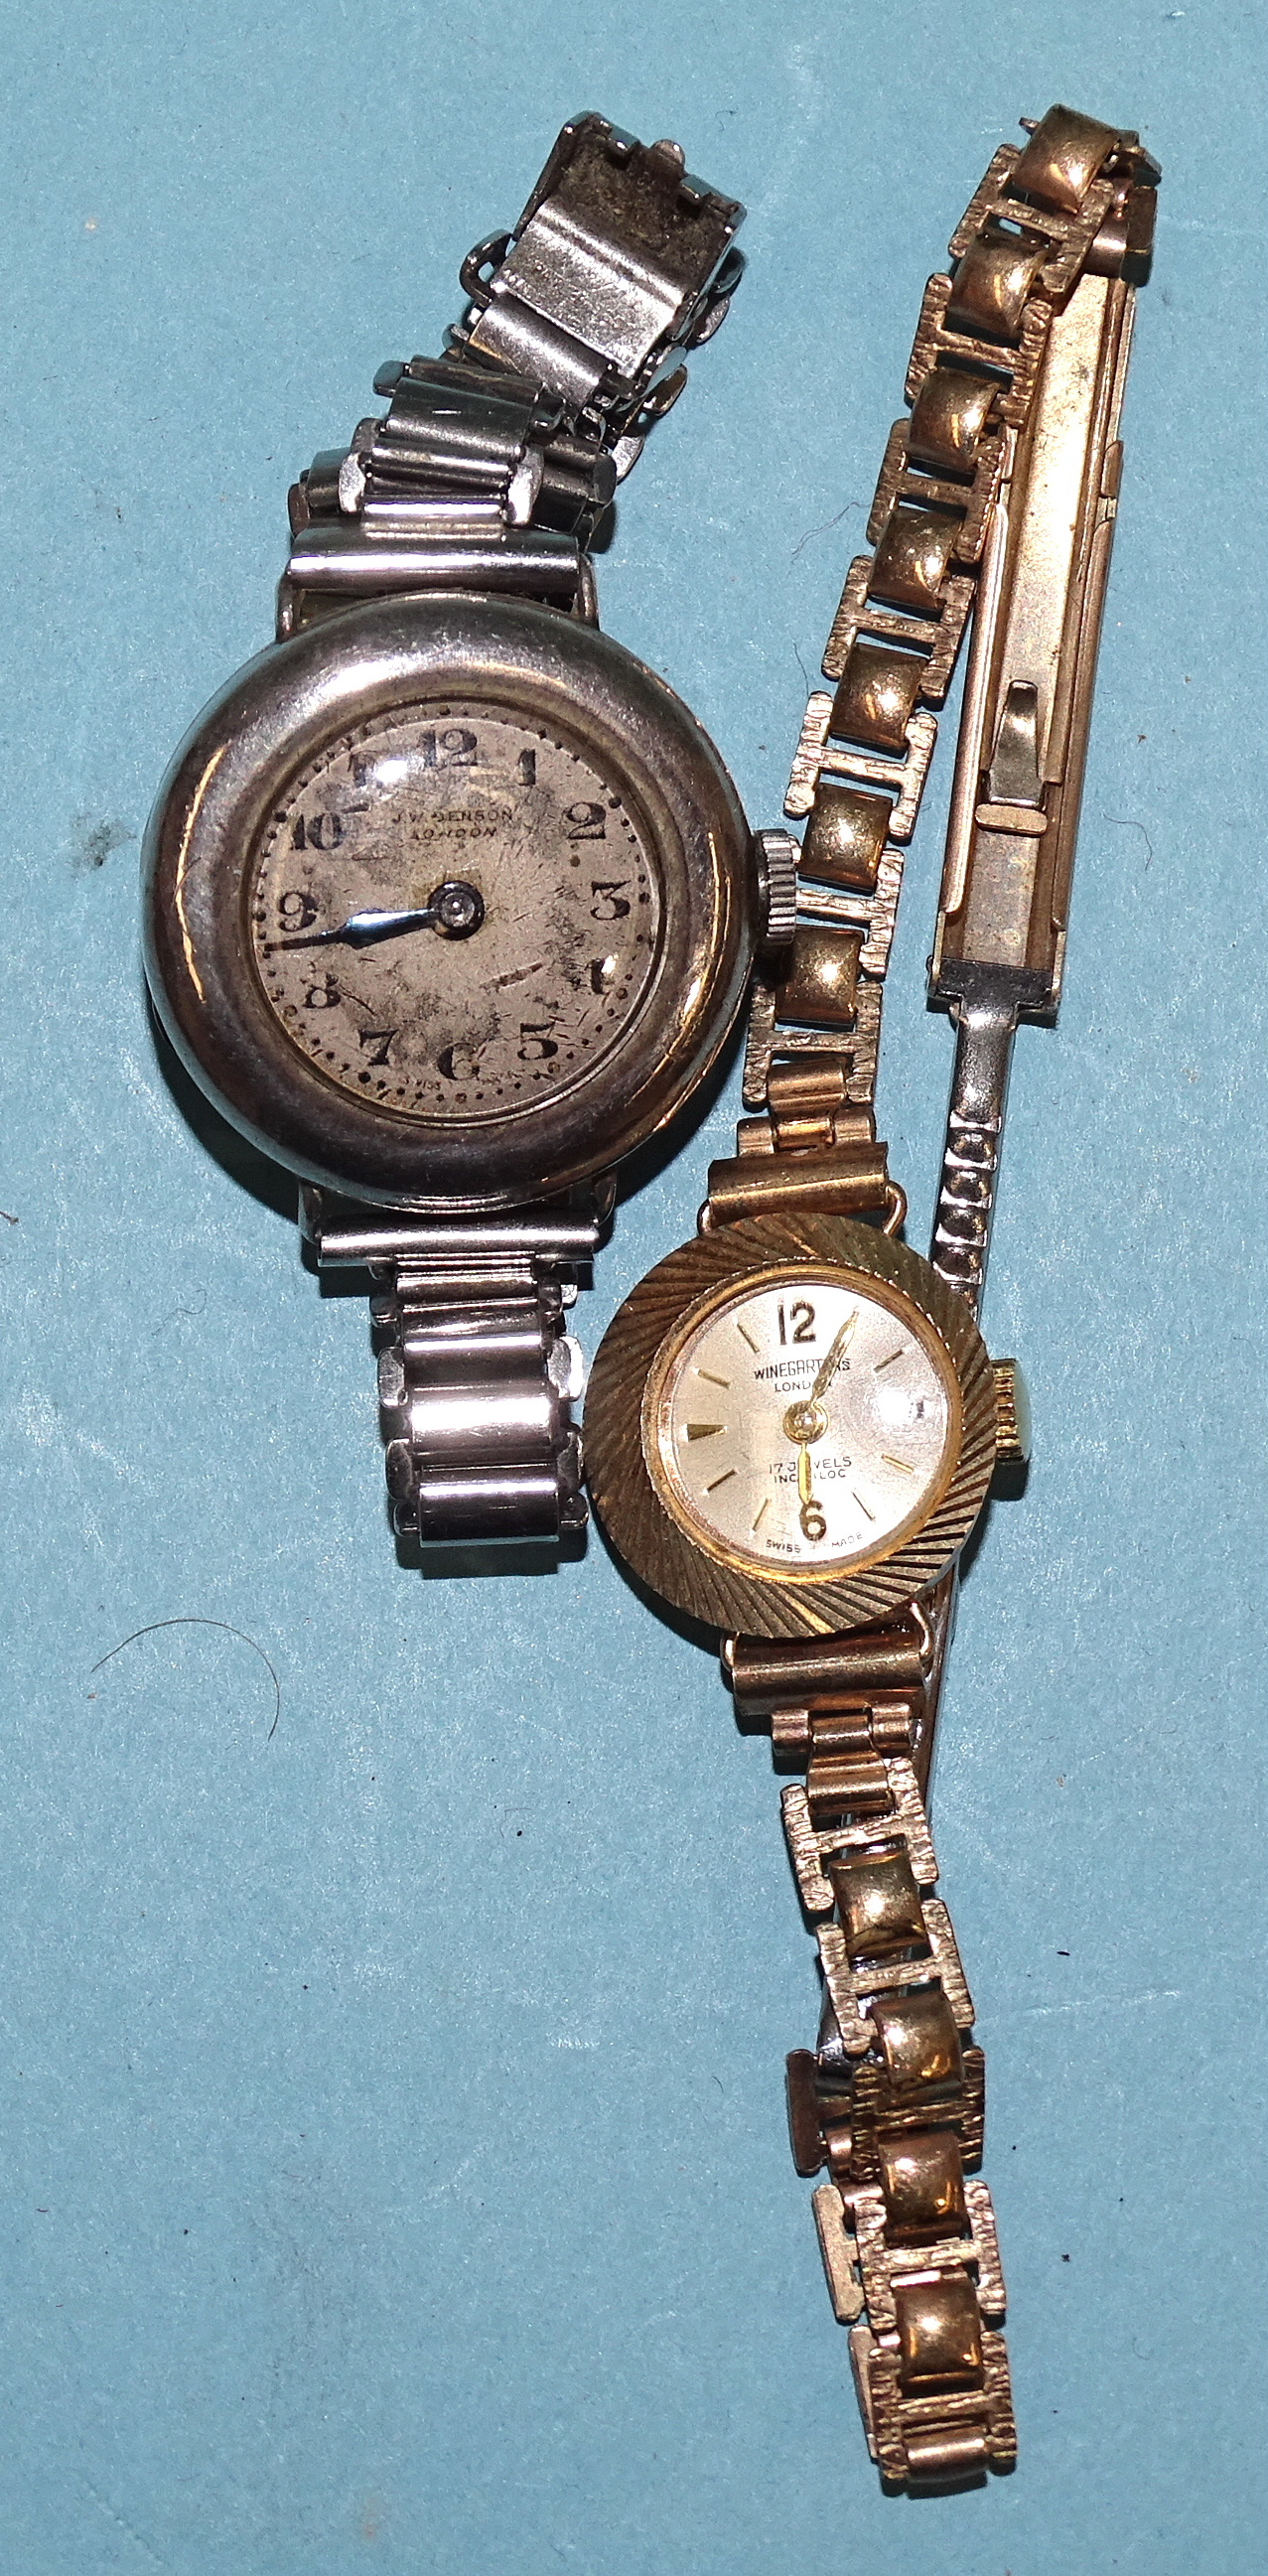 A lady's 9ct gold-cased wrist watch on plated bracelet and a lady's silver-cased wrist watch